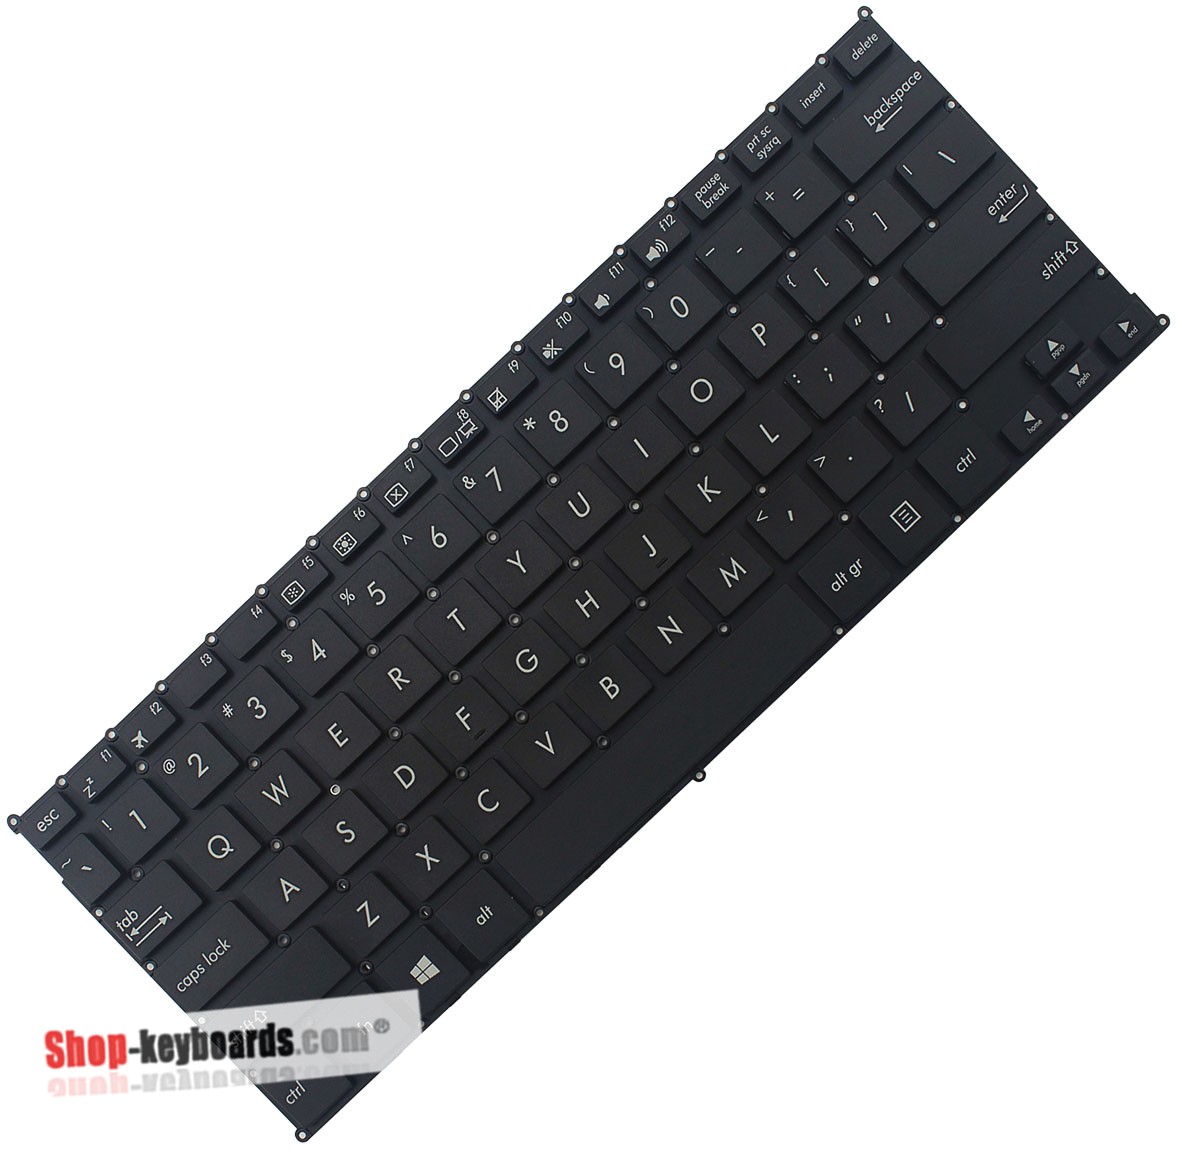 Asus 0KNL0-1120ND00 Keyboard replacement